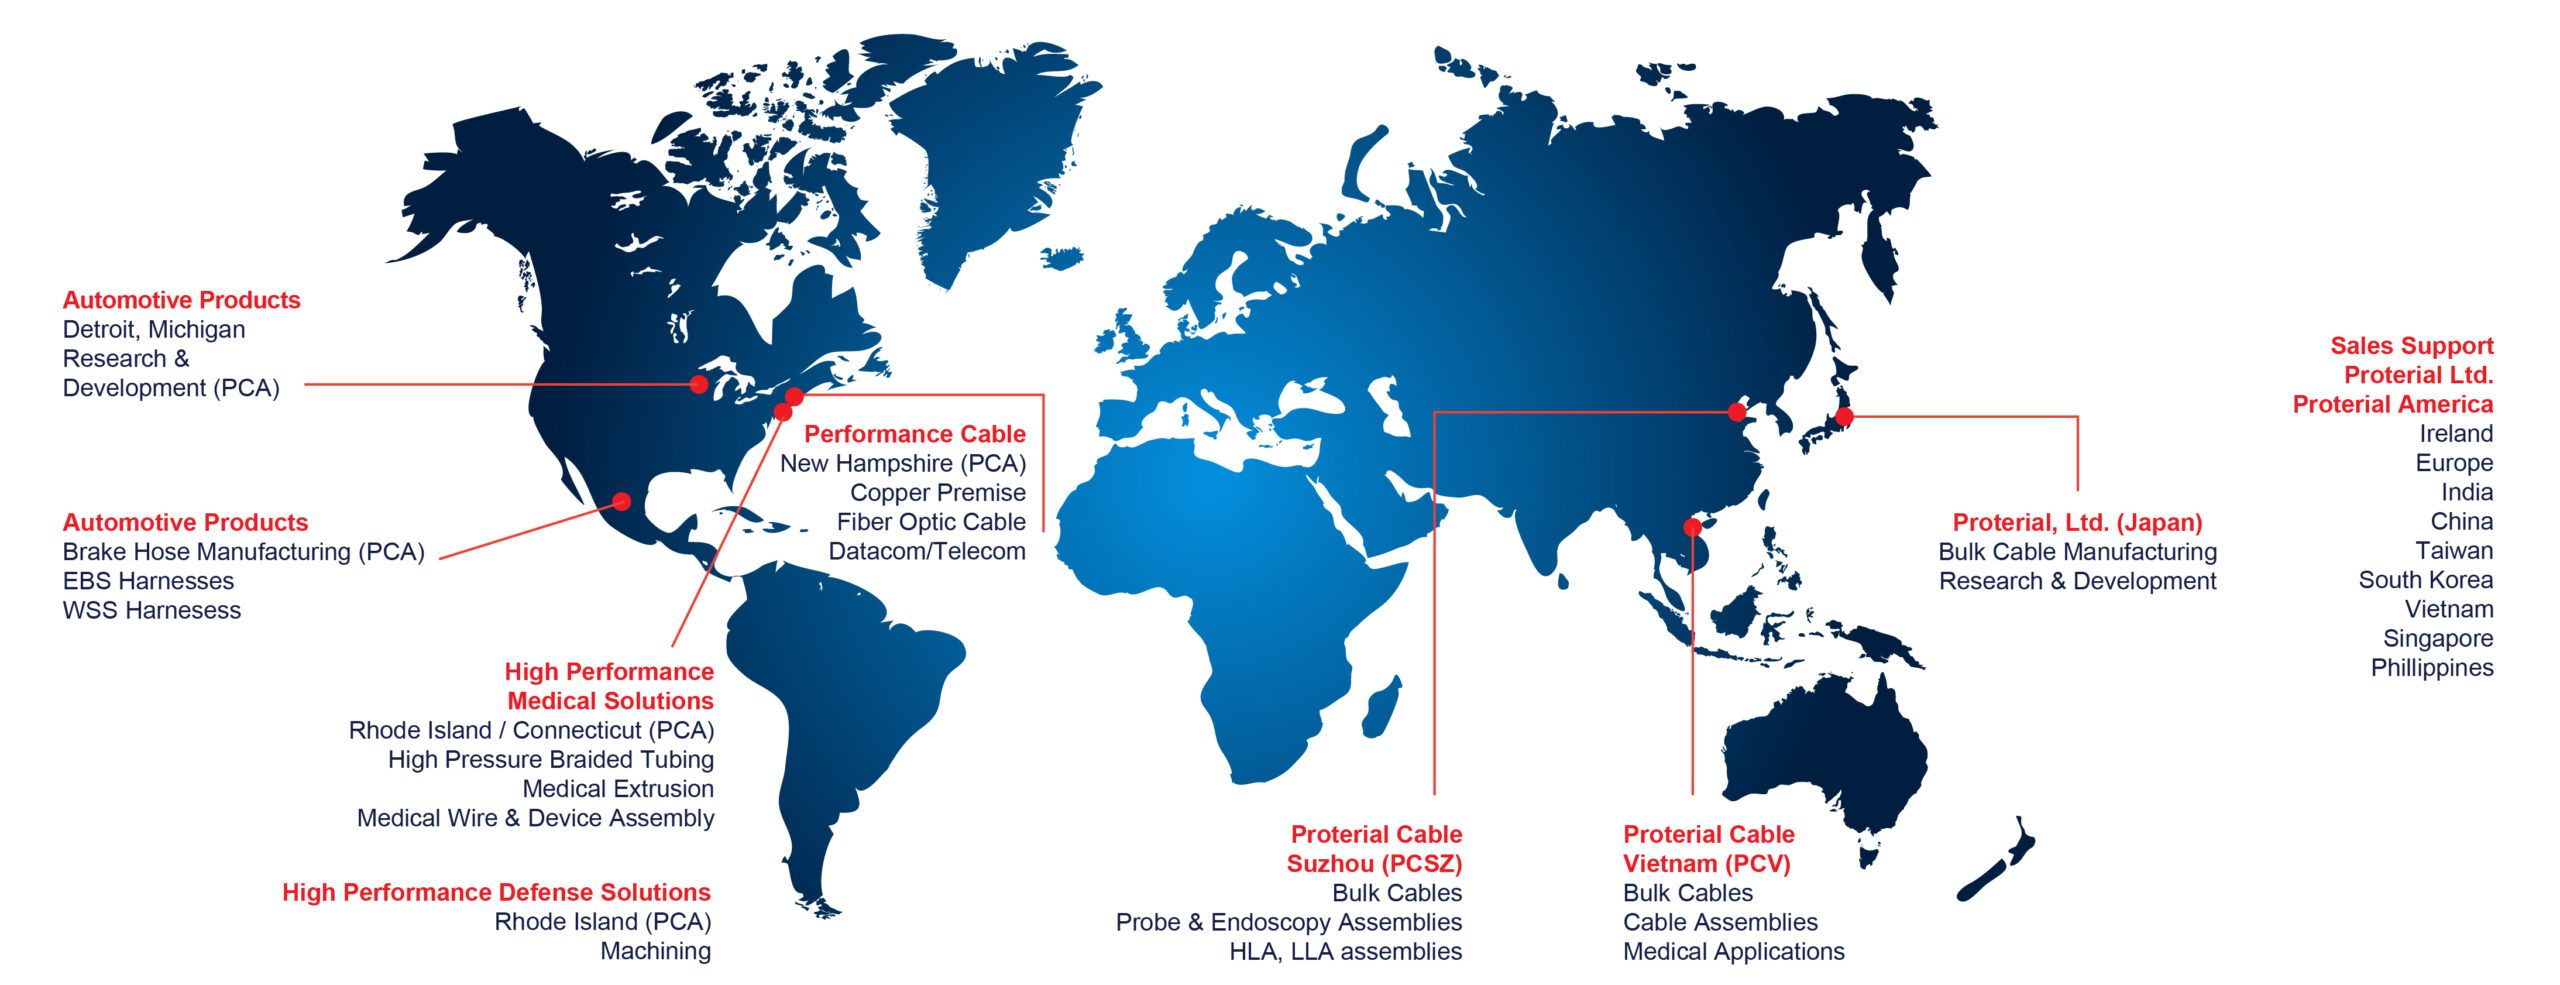 Proterial Manufacturing Locations